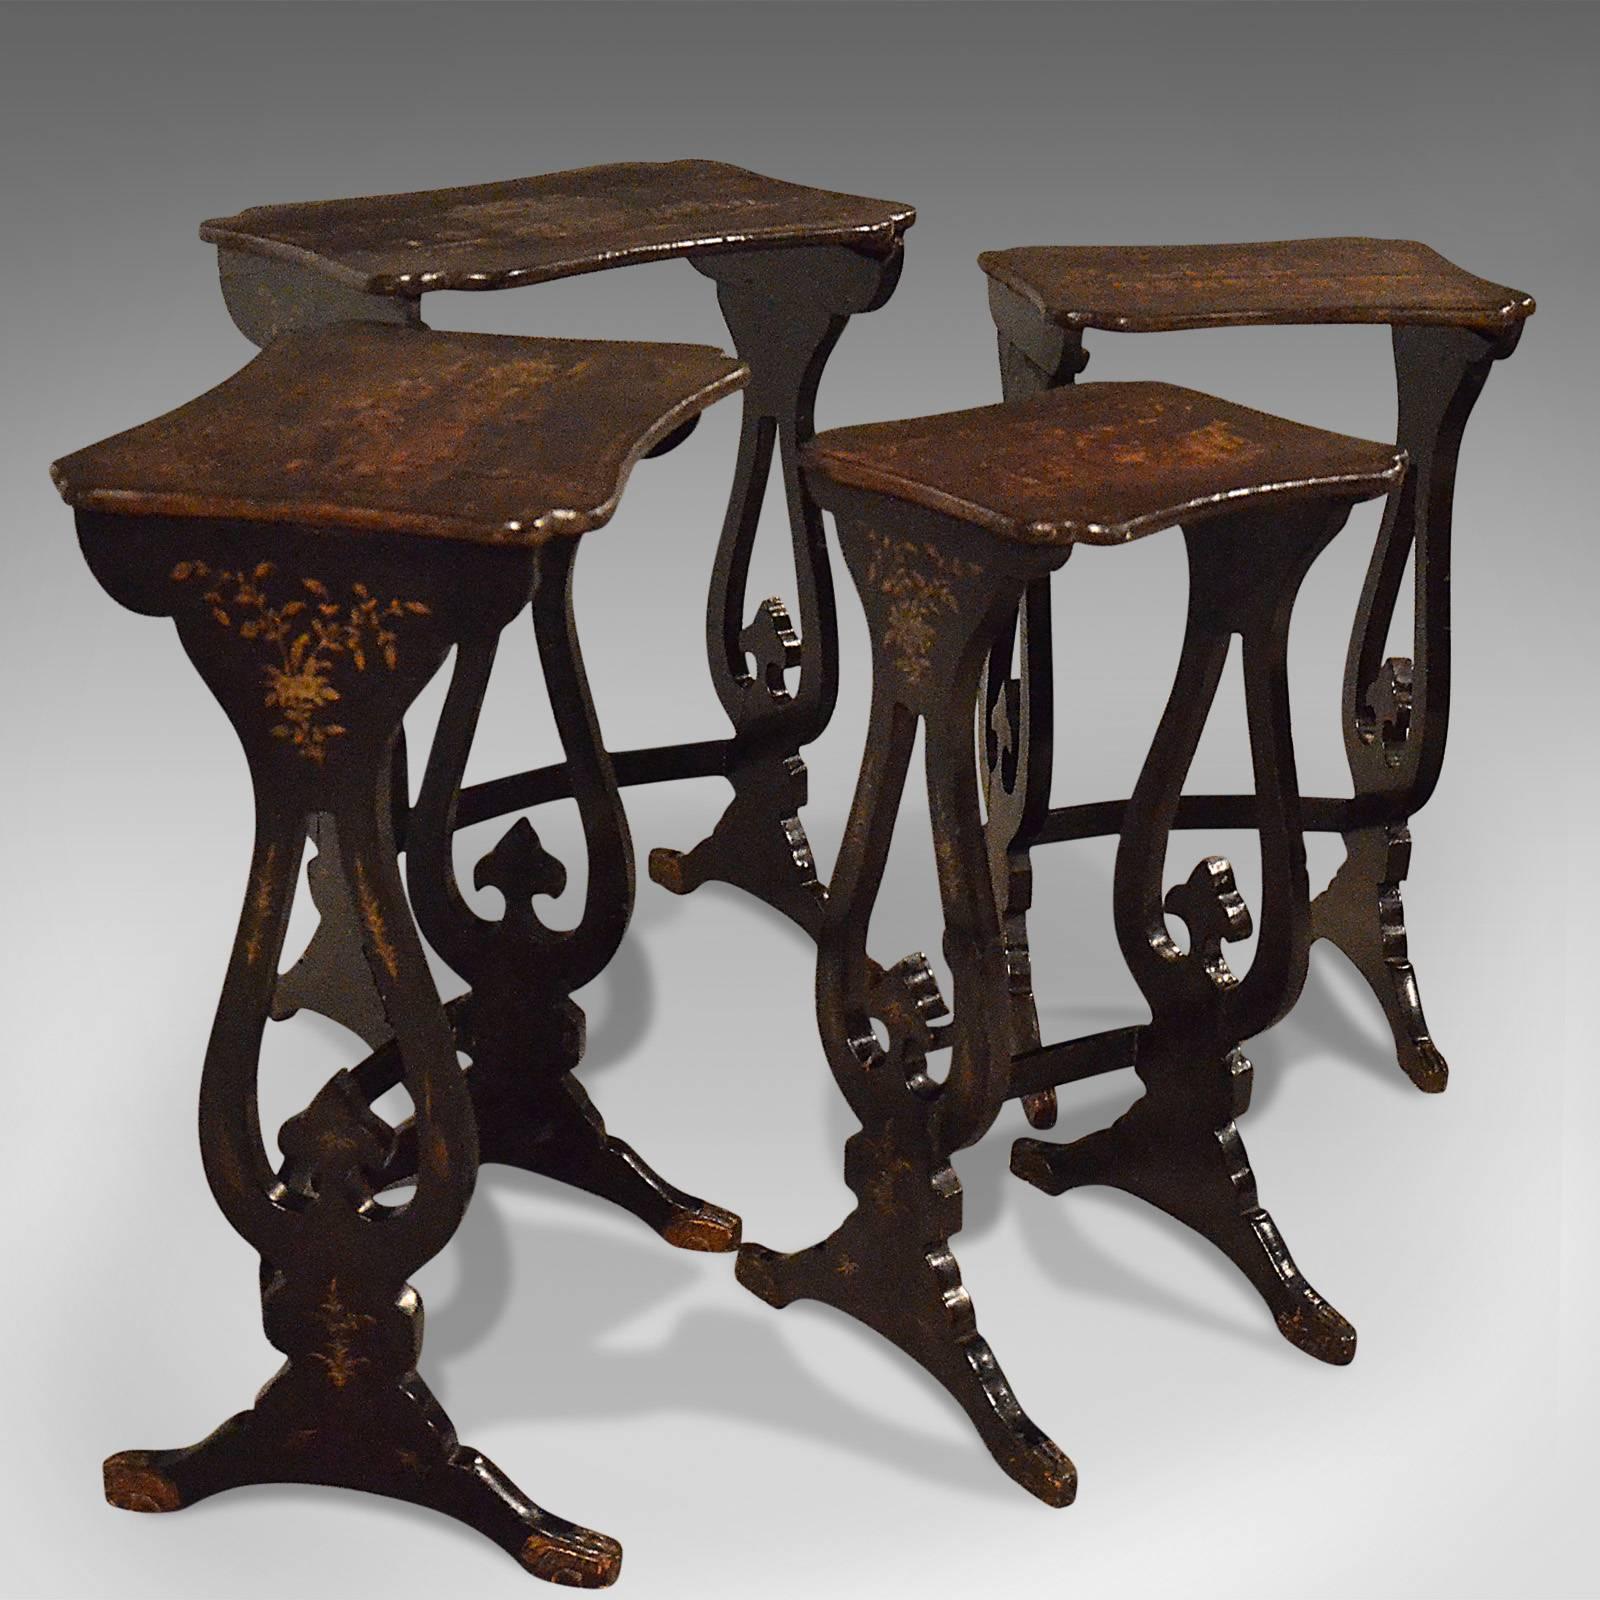 Antique Nest of Tables, Four Chinoiserie Side Tables, 19th Century, circa 1890 6